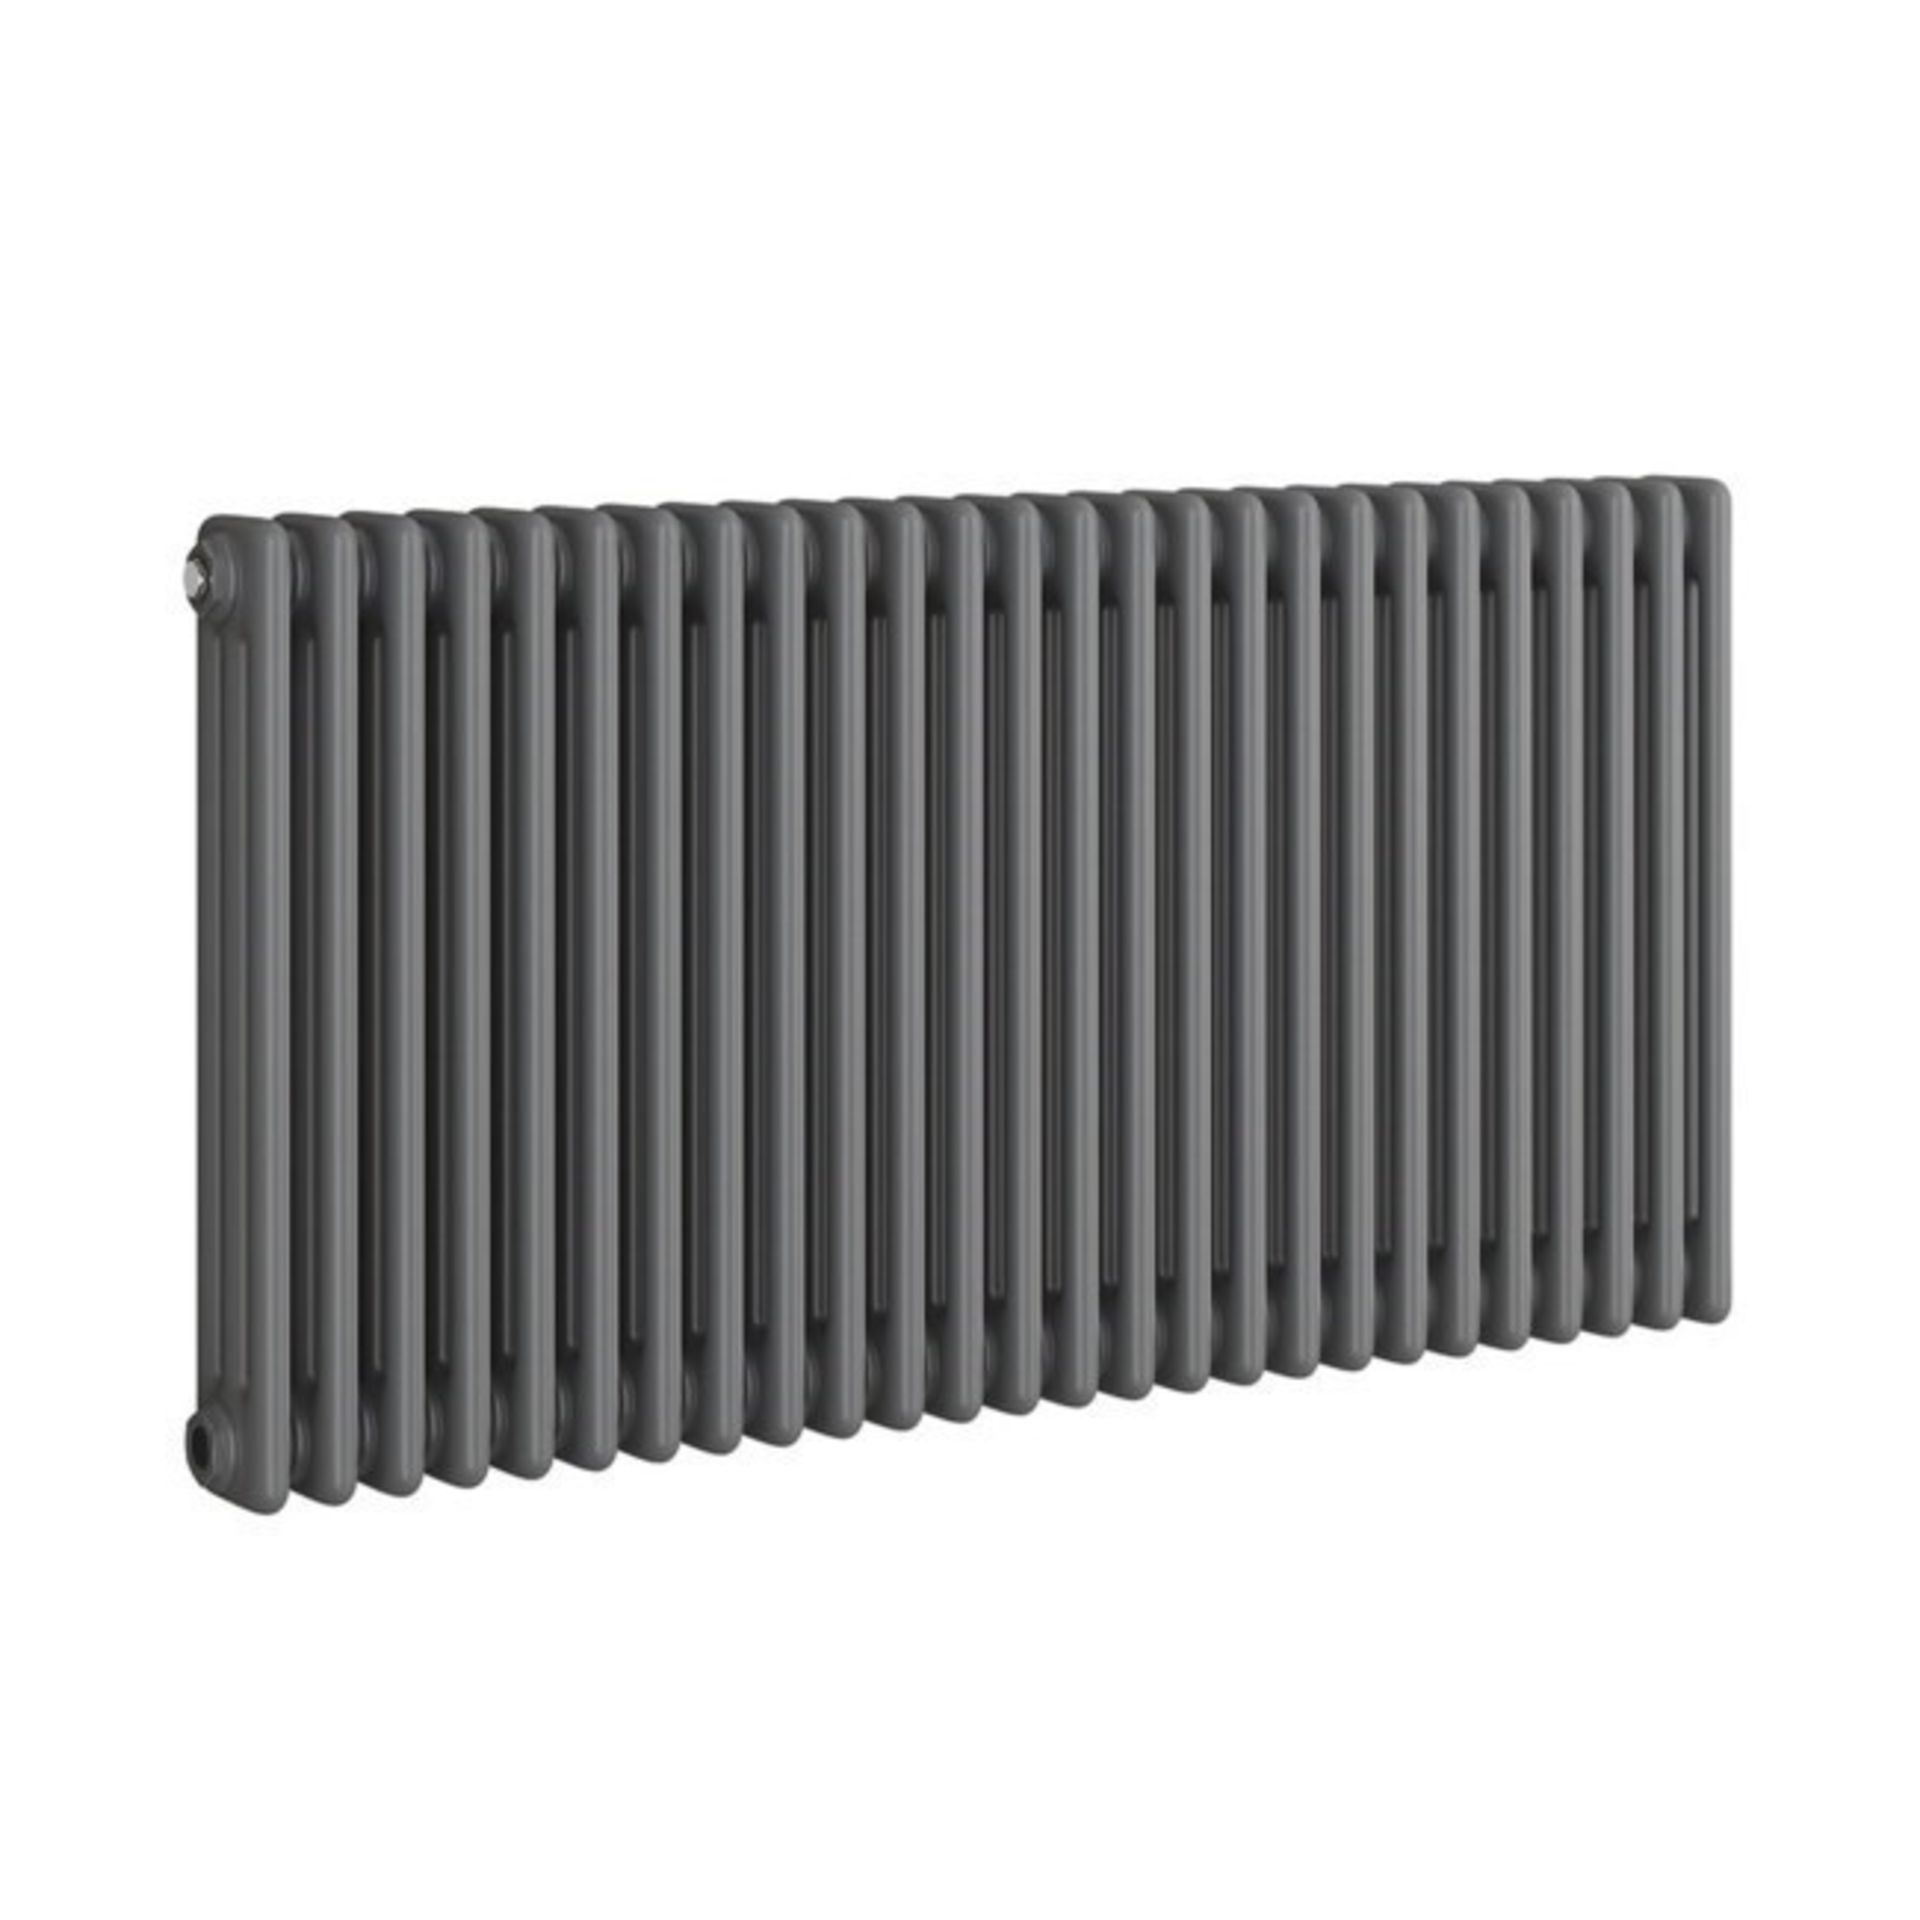 New Boxed 600x828mm Anthracite Double Panel Horizontal Colosseum Traditional Radiator.Rca563.RR - Image 2 of 2